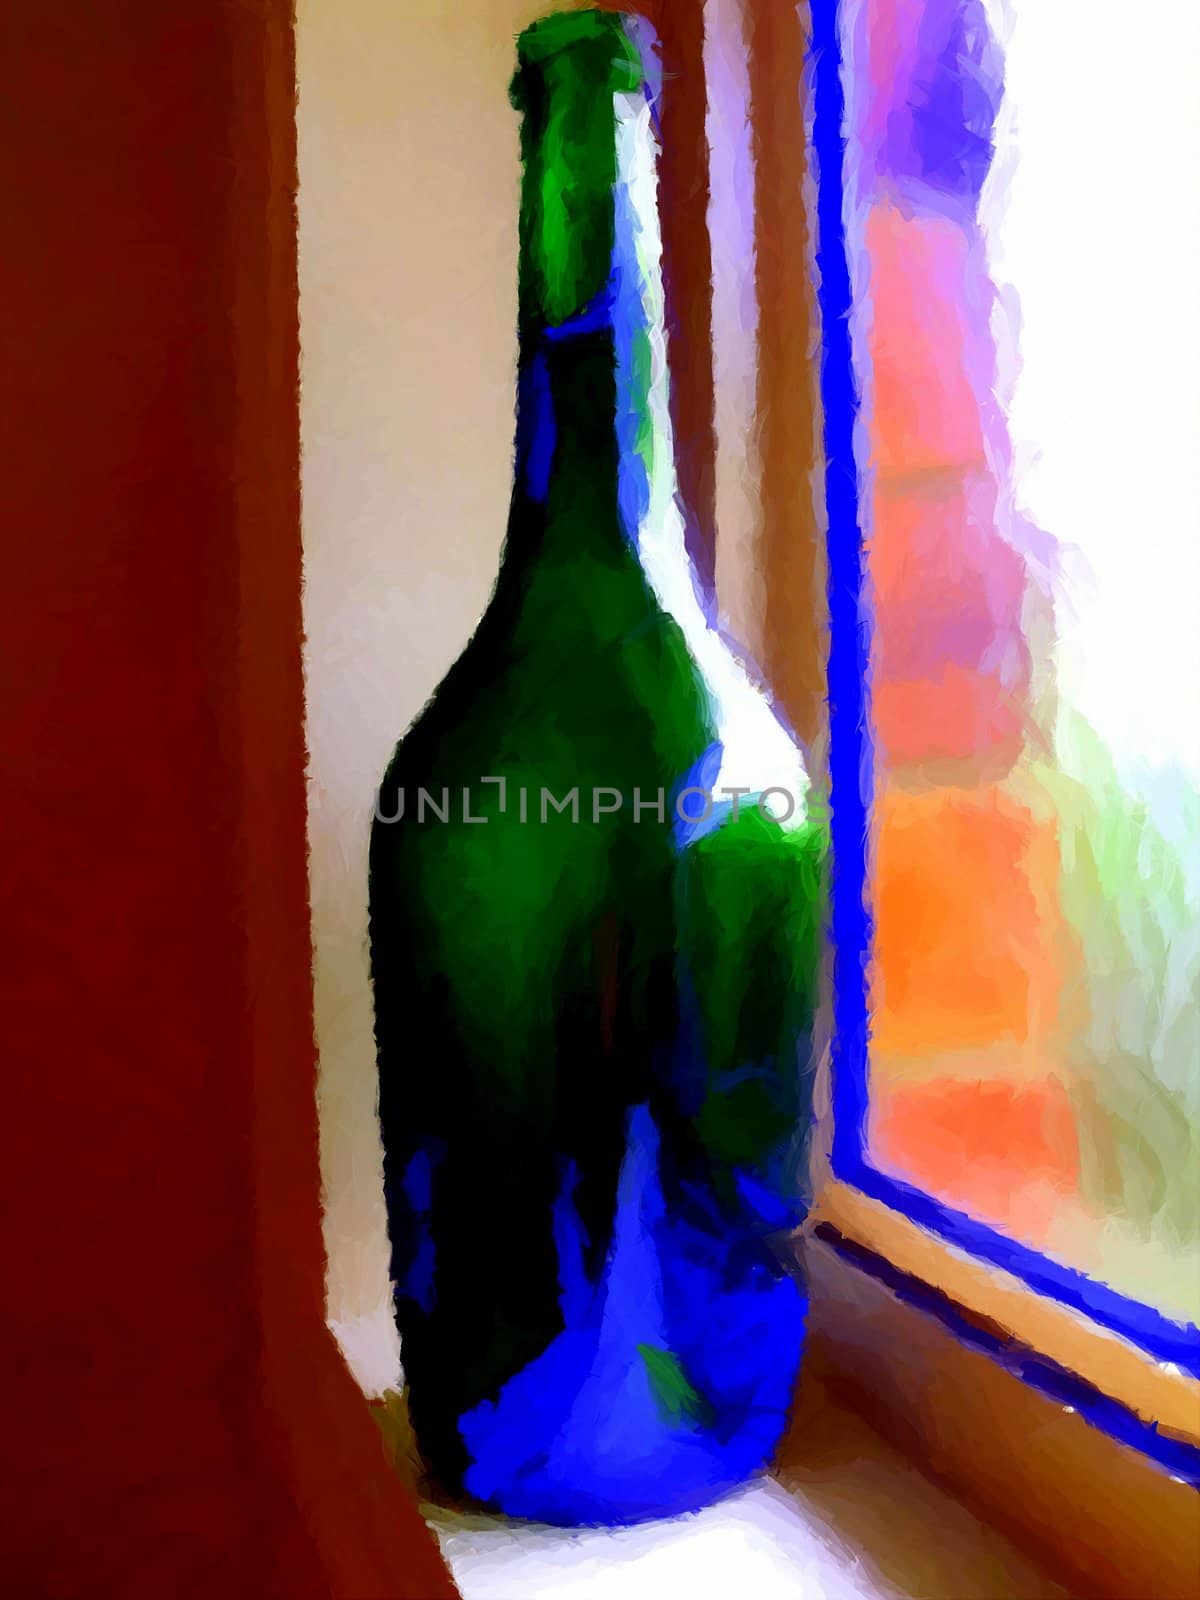 Painting of a wine bottle